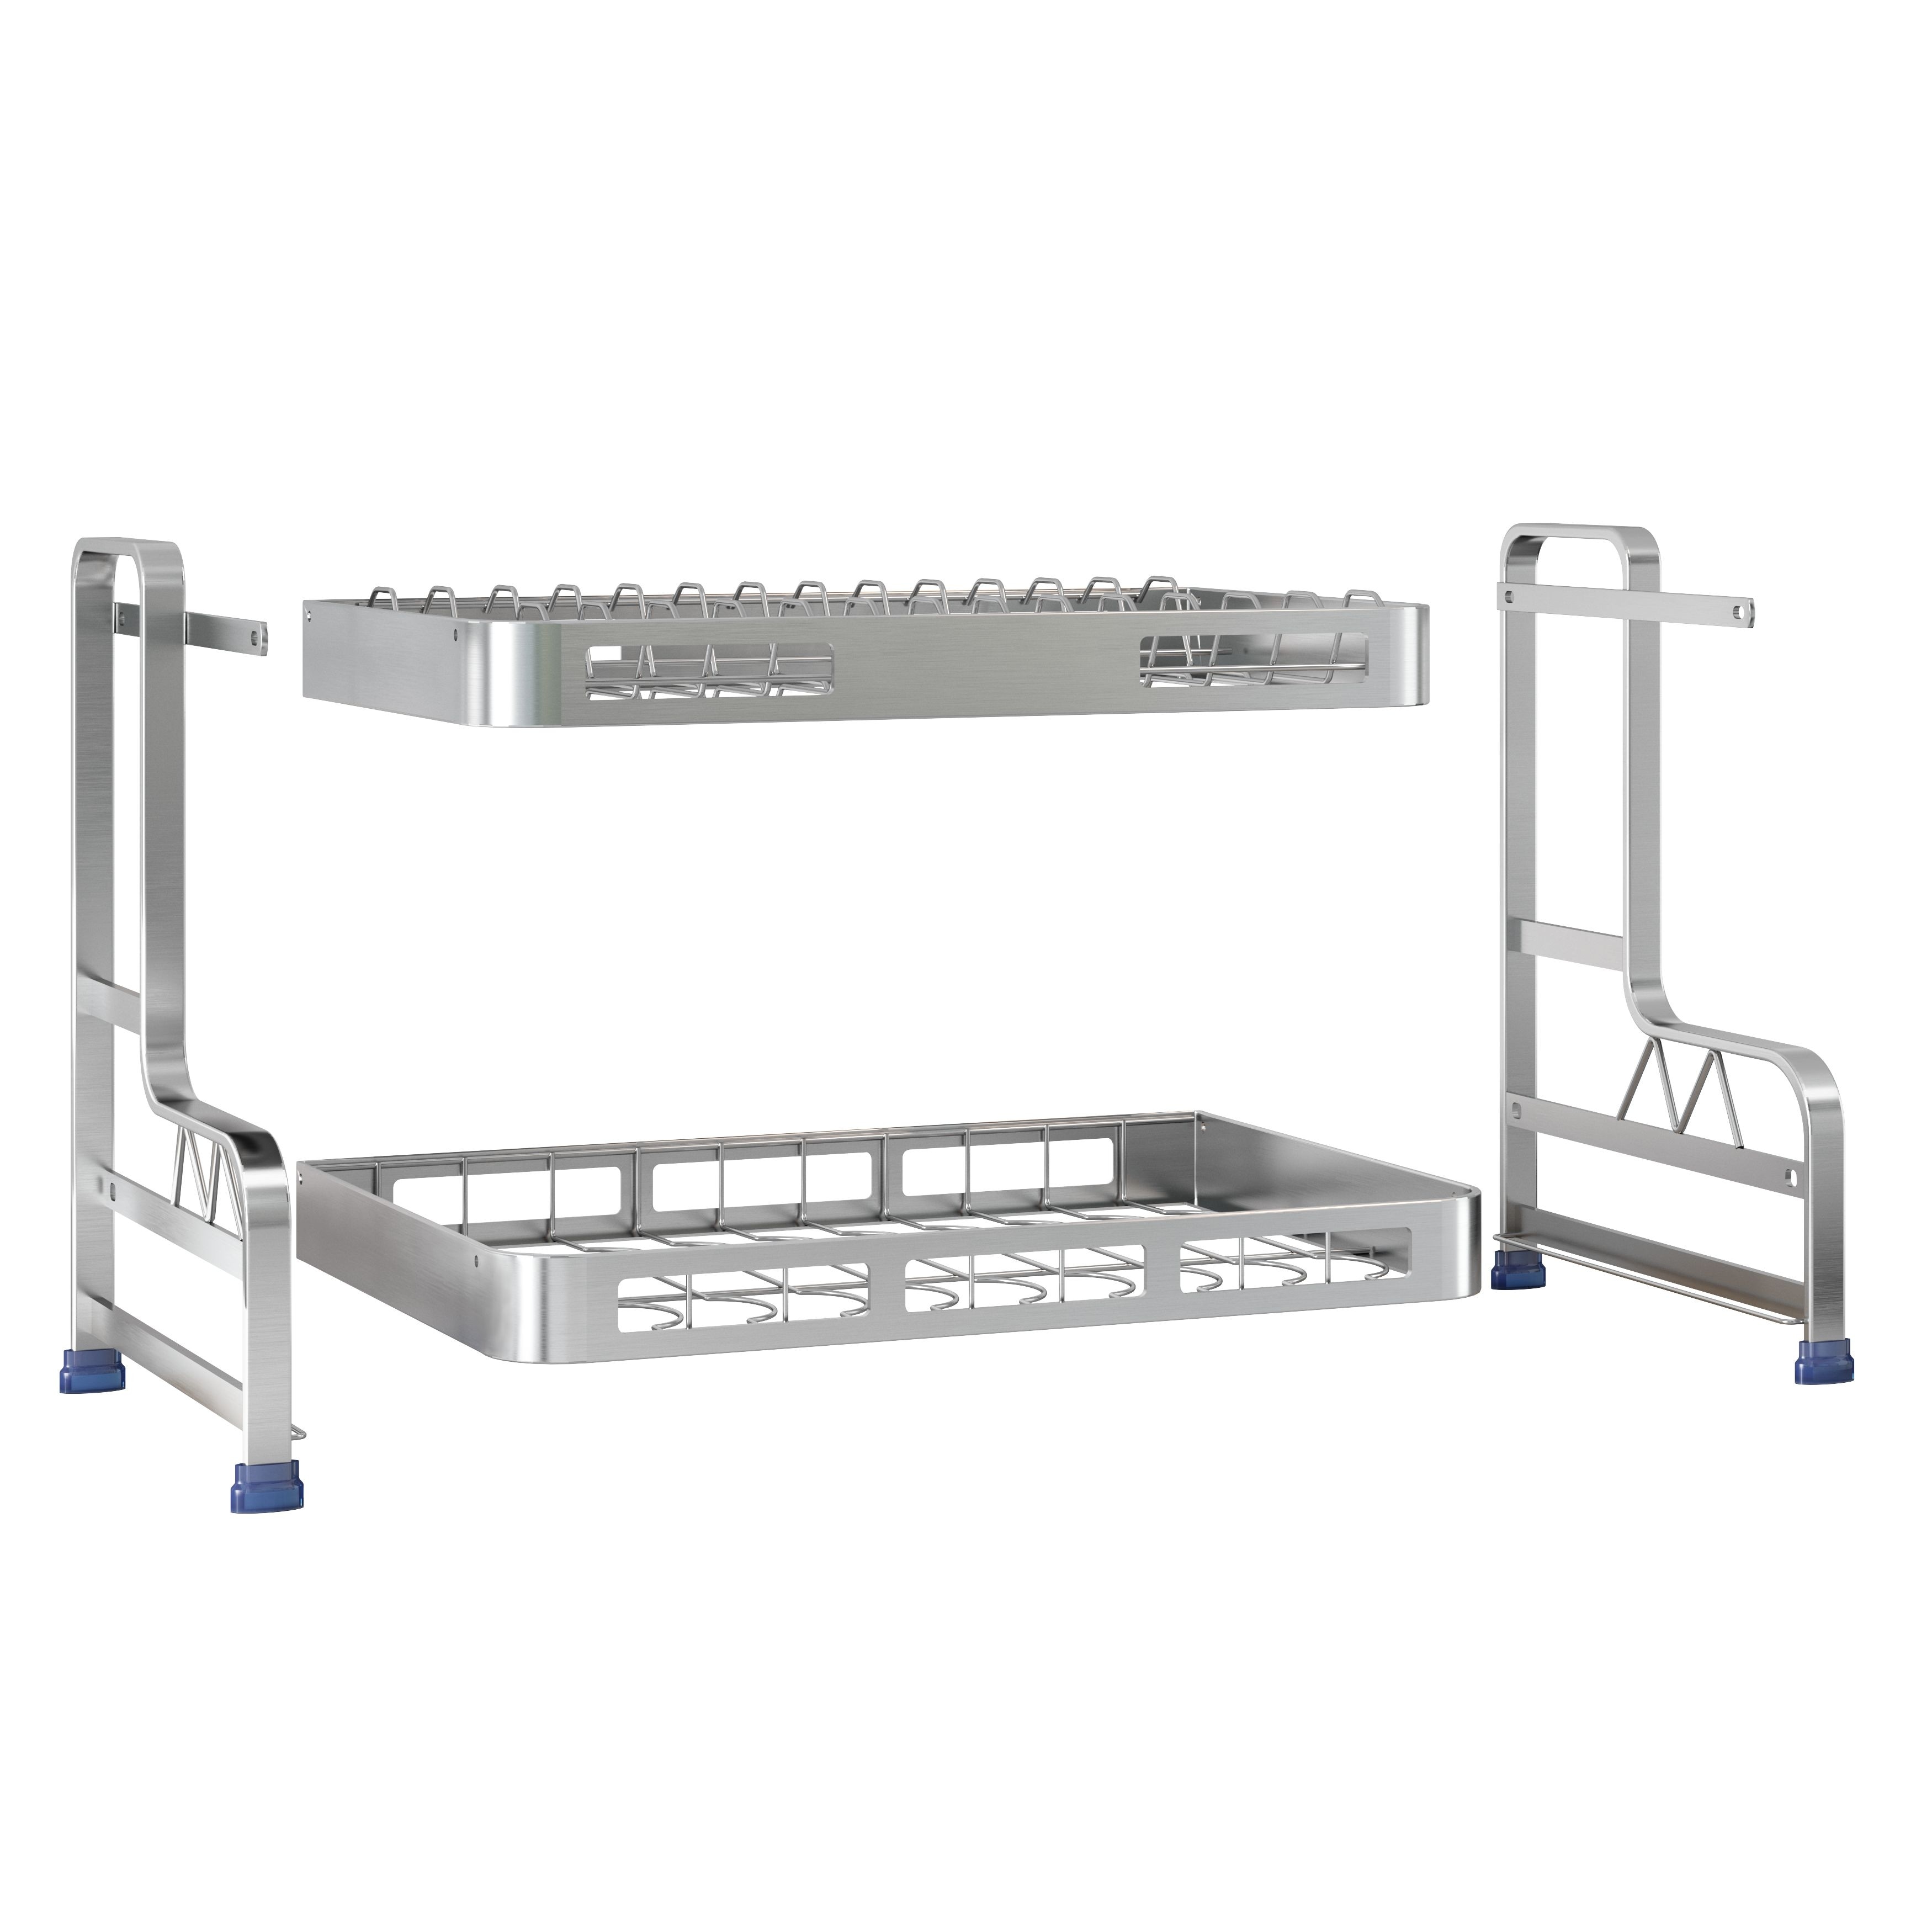 https://ak1.ostkcdn.com/images/products/is/images/direct/f7b76c8312f3a7c9f278a4cf4159a7a779f0e1eb/2-Tier-Kitchen-Stainless-Steel-Dish-Rack-with-Cutlery-Holder.jpg